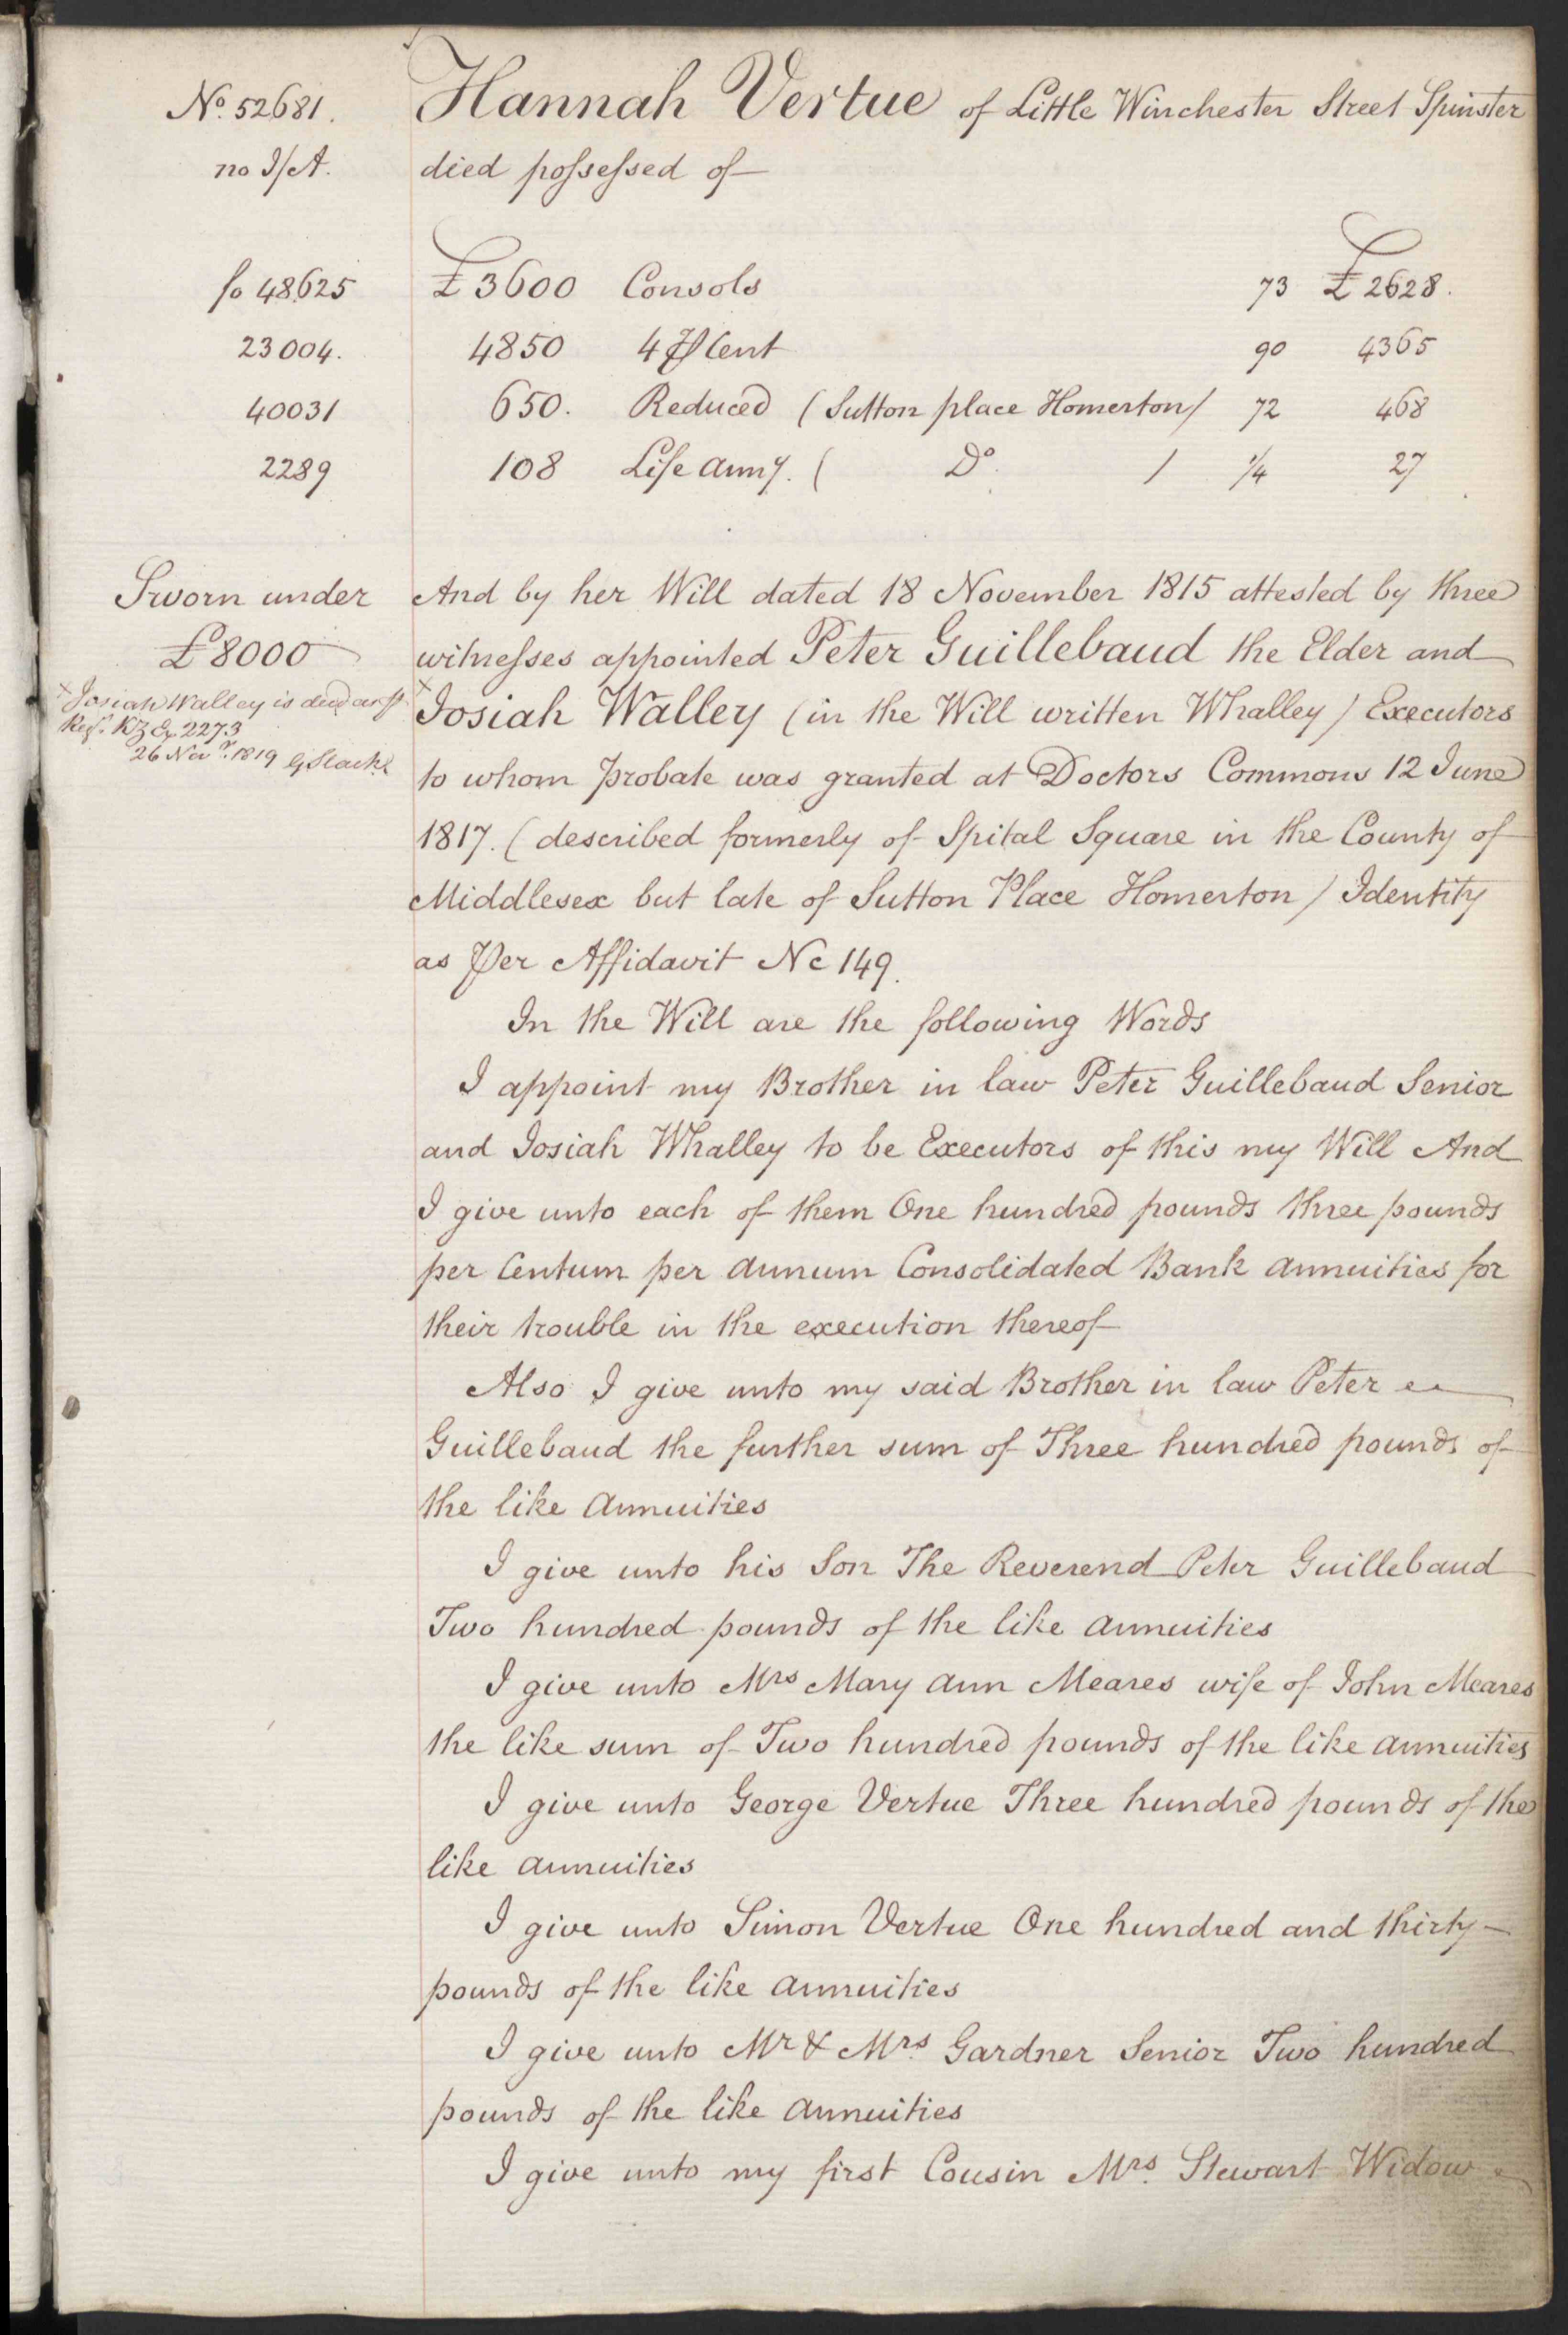 The will of Hannah Vertue - page 1, who could be Hannah Vertue born 1836